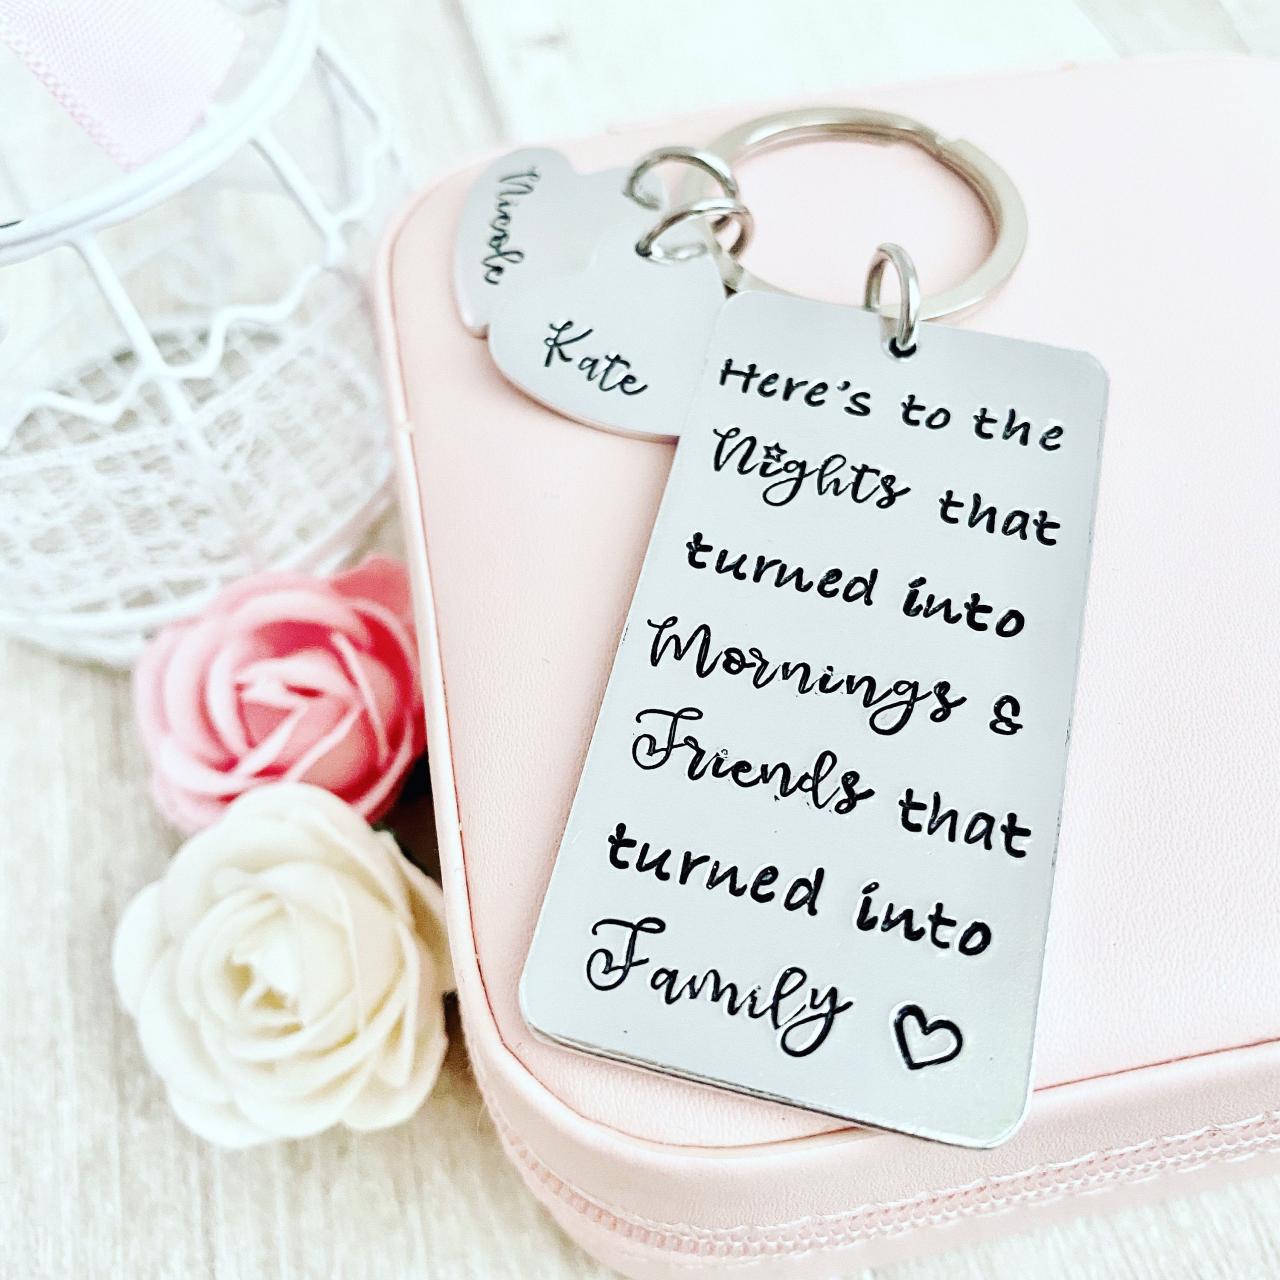 Best Friend Gift, Friend Gift, Best Friend Birthday, Friendship Gift, Friendship Quote, Personalized Gift, Friends that turned into Family